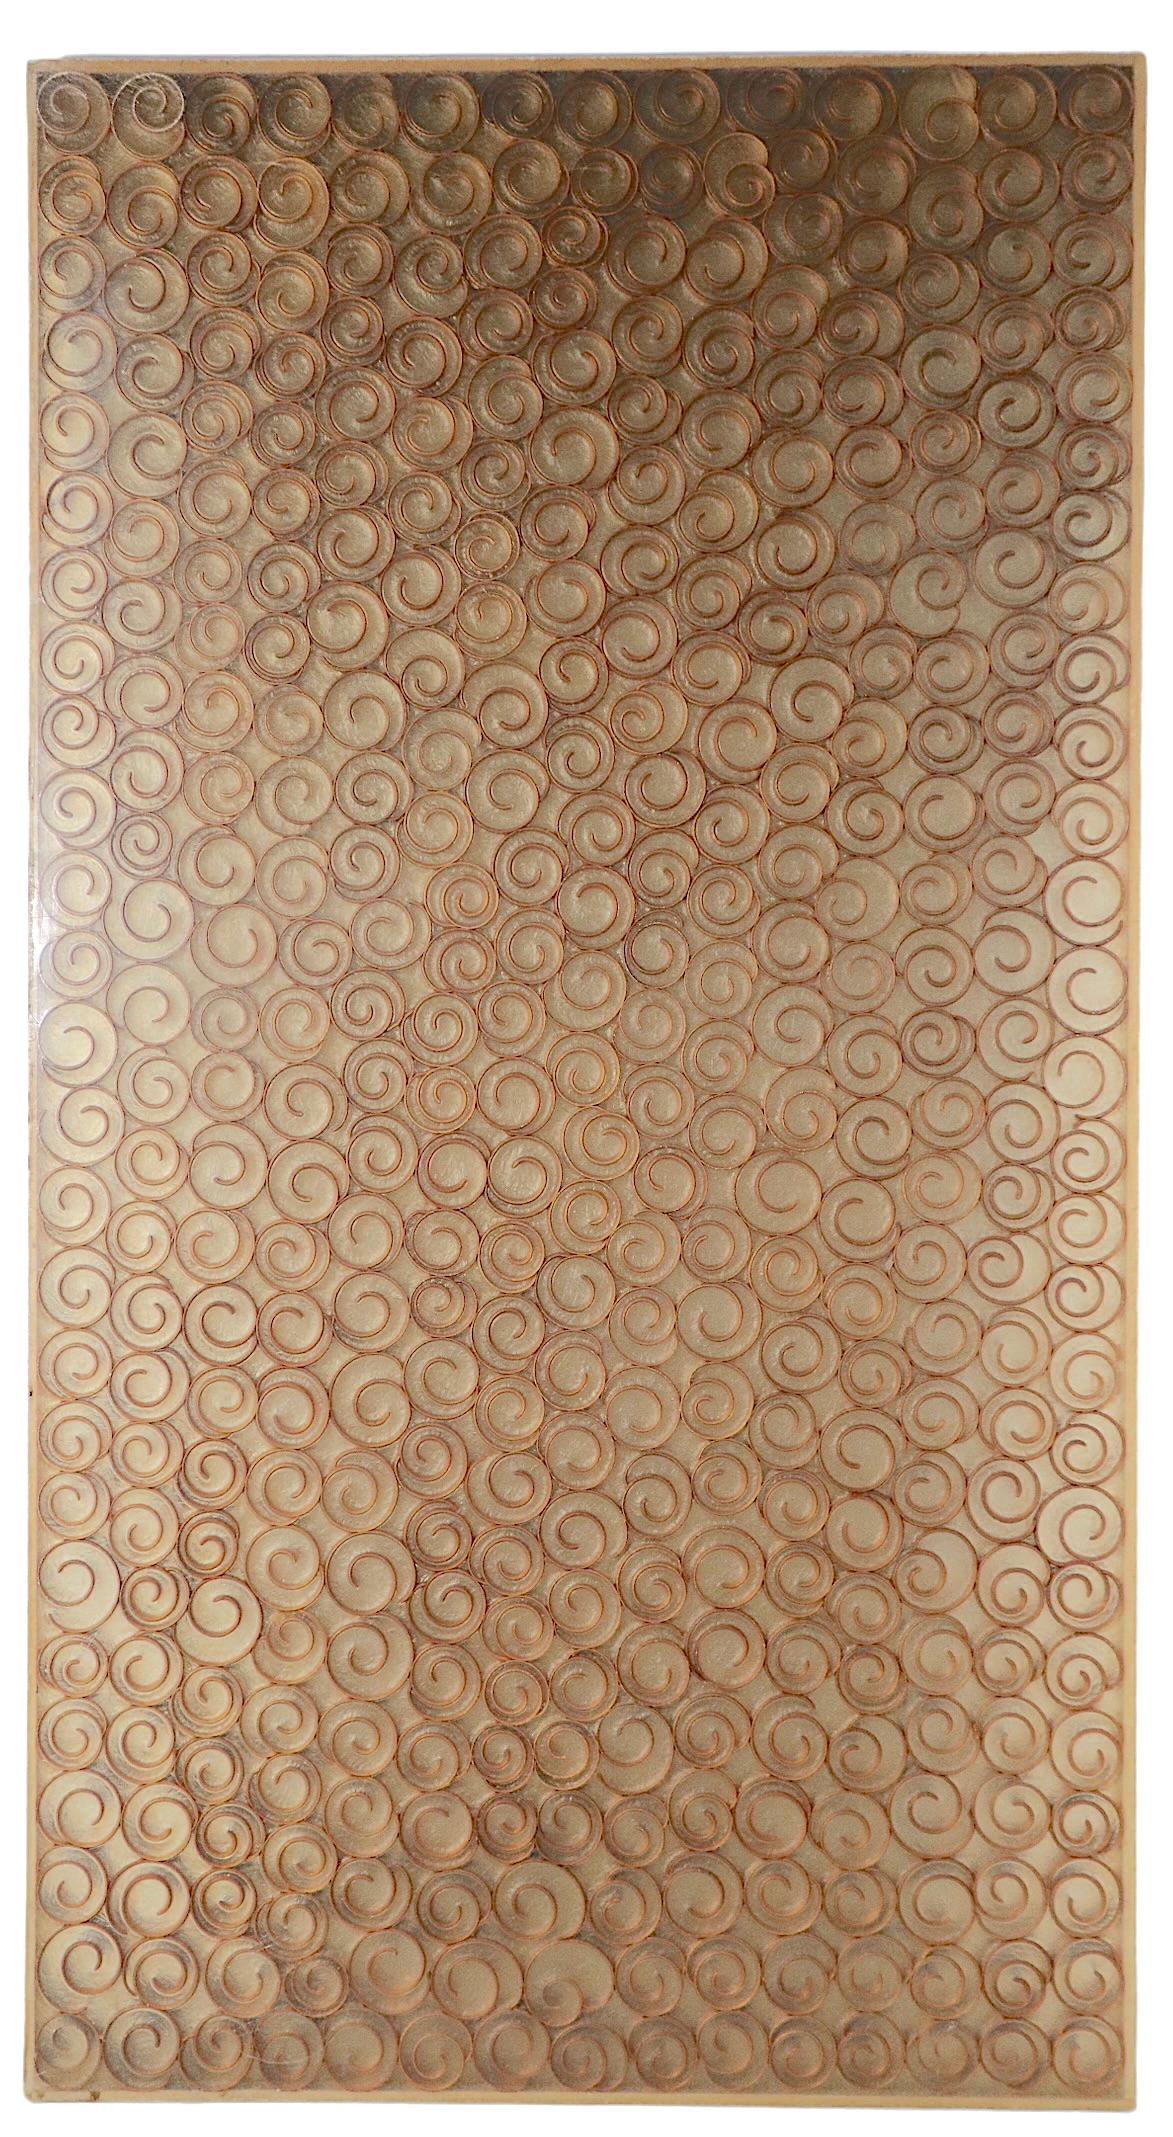 Modernist Translucent Architectural Panel with Repeating Curlicue Field Motif For Sale 4